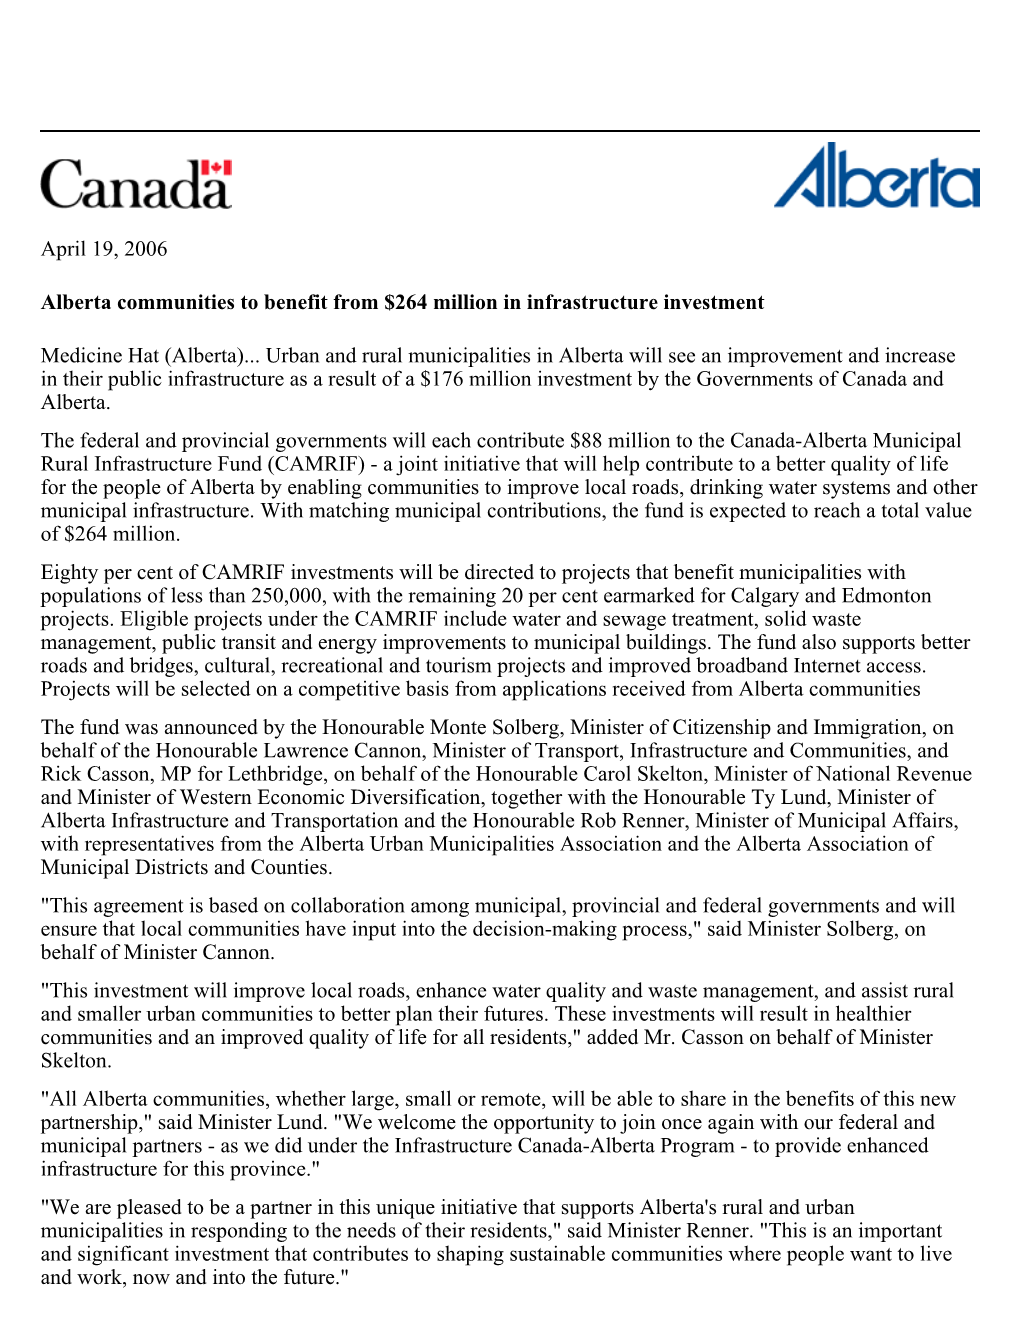 April 19, 2006 Alberta Communities to Benefit from $264 Million in Infrastructure Investment Medicine